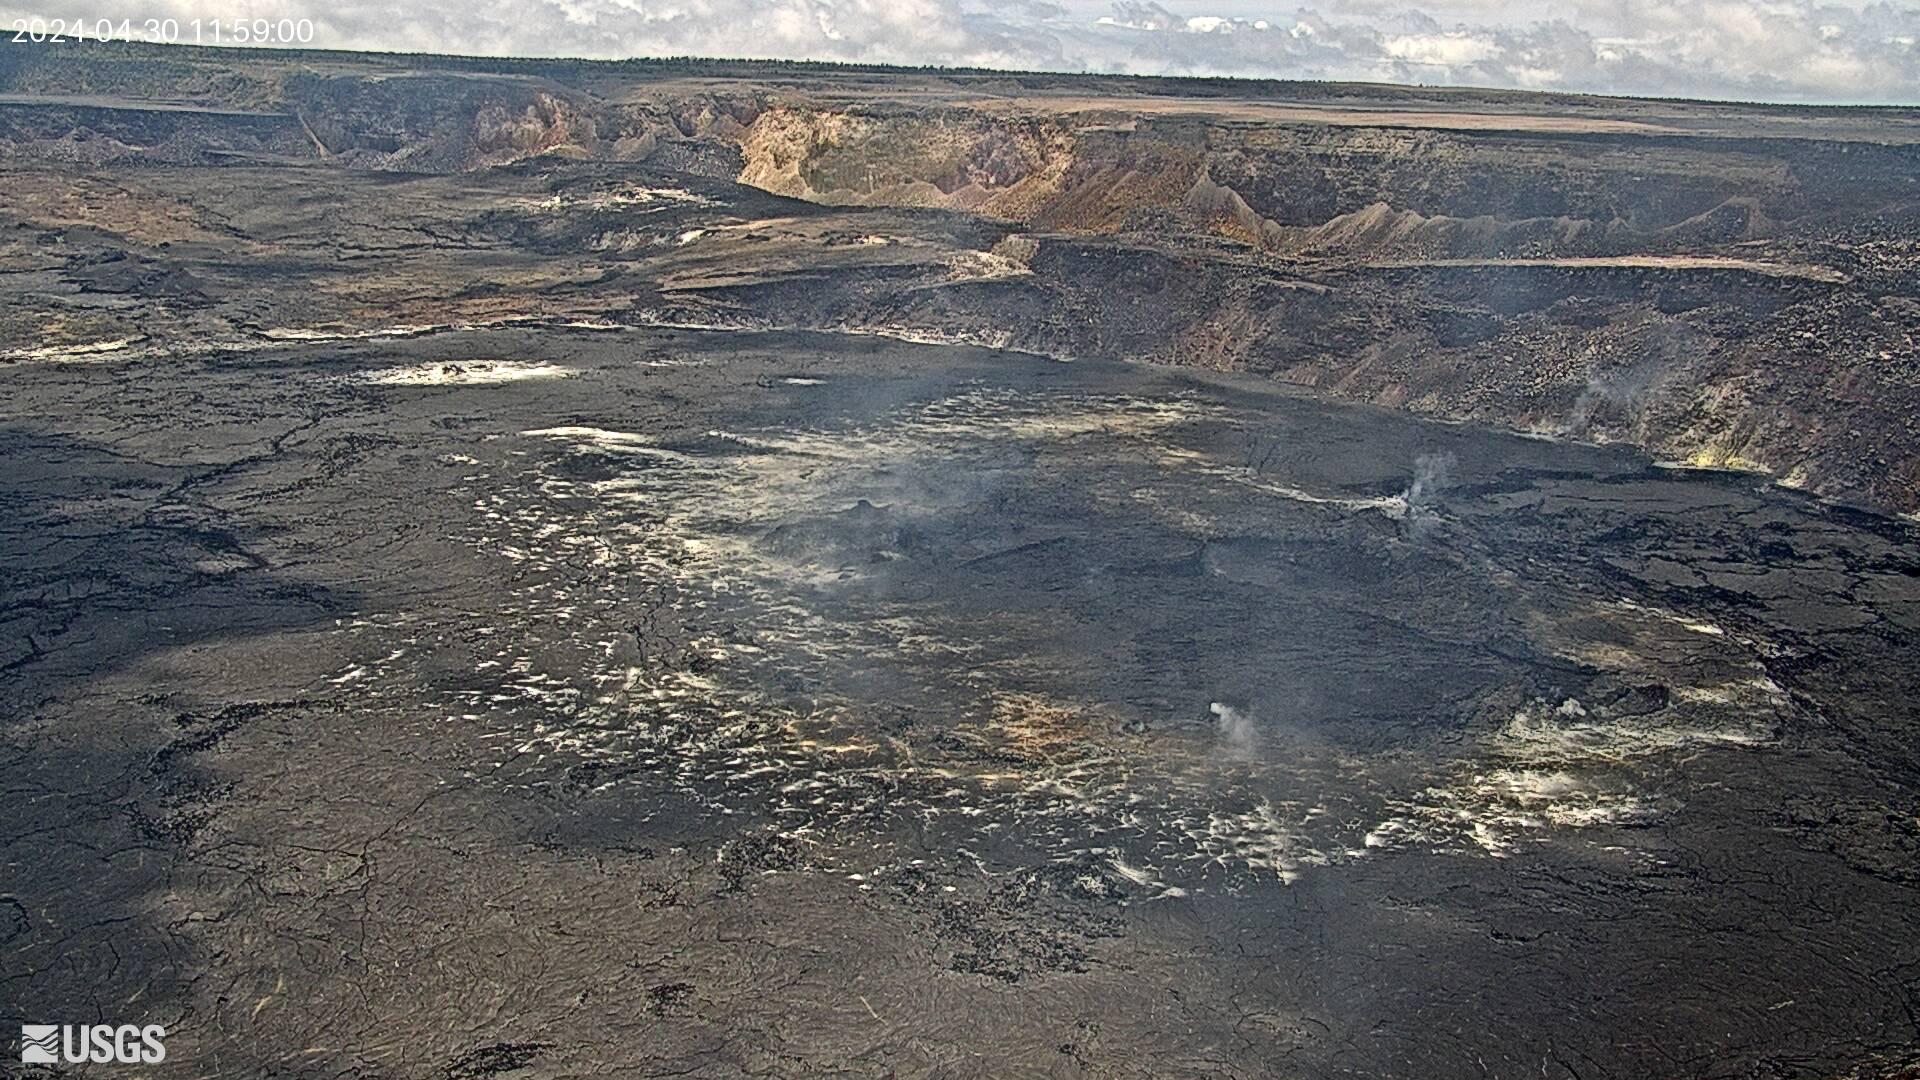 Webcam image view of volcanic vent in summit crater